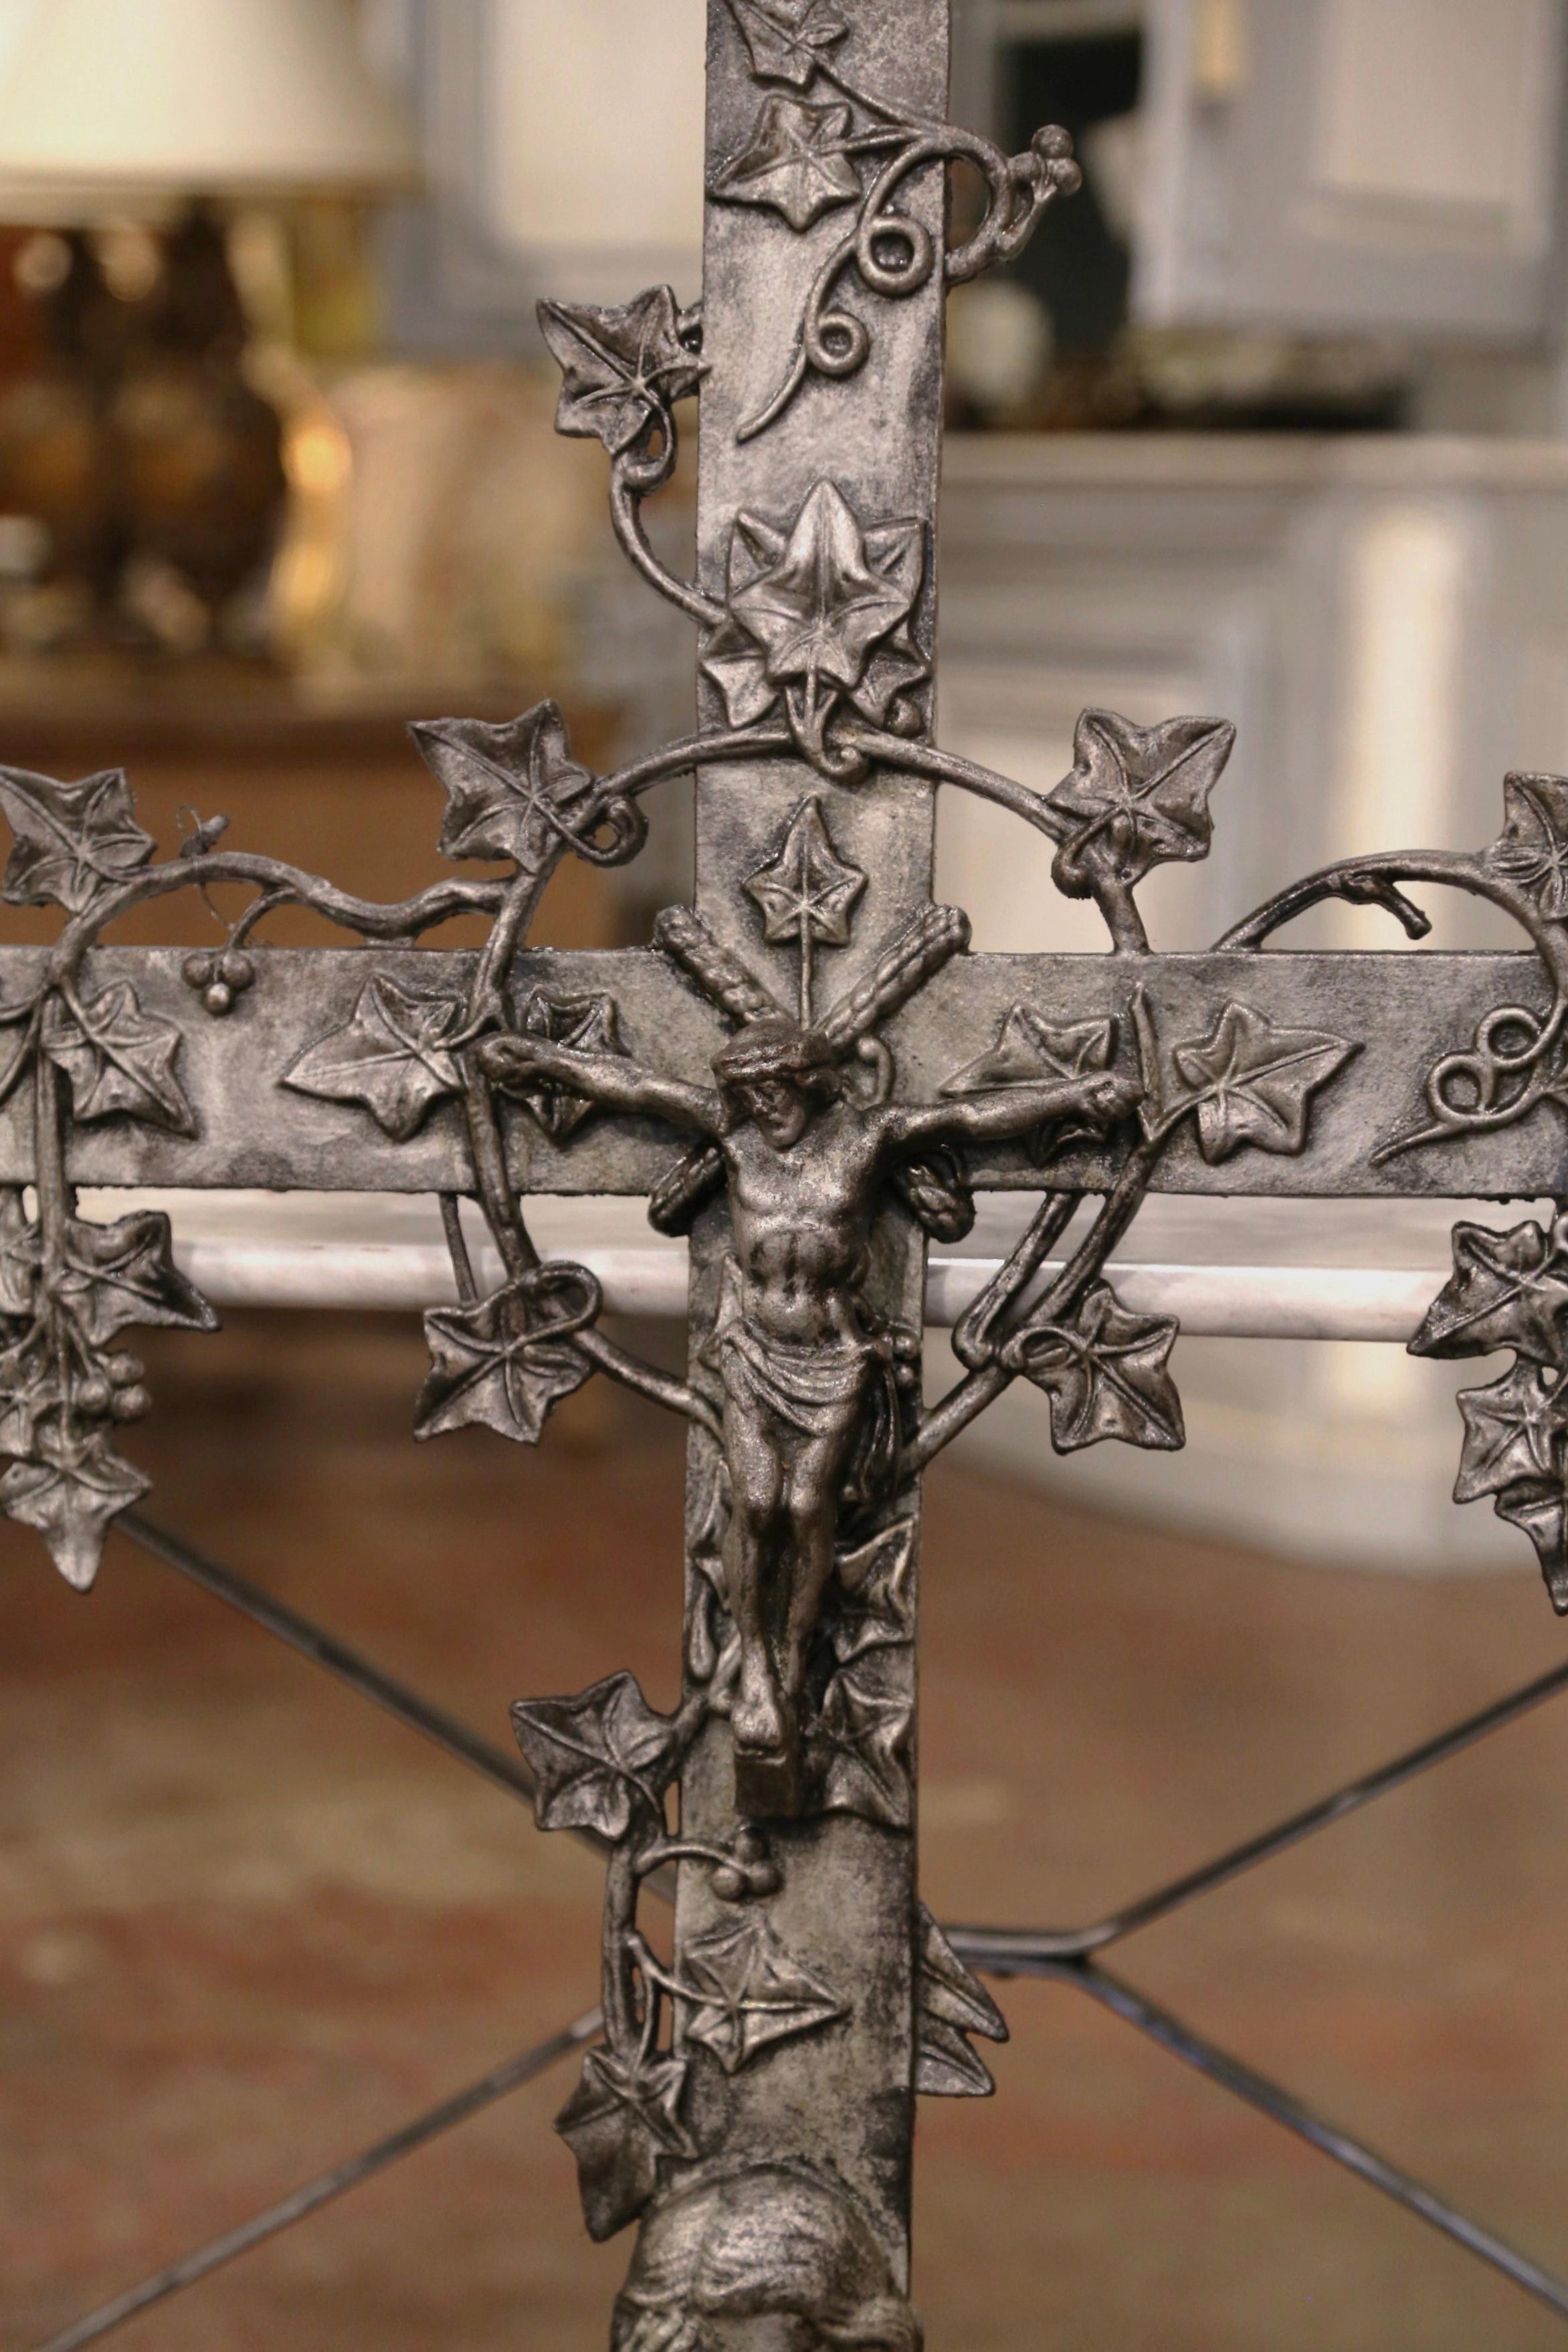 19th Century French Iron Garden Crucifix Cross with Mourner and Vine Motifs 1